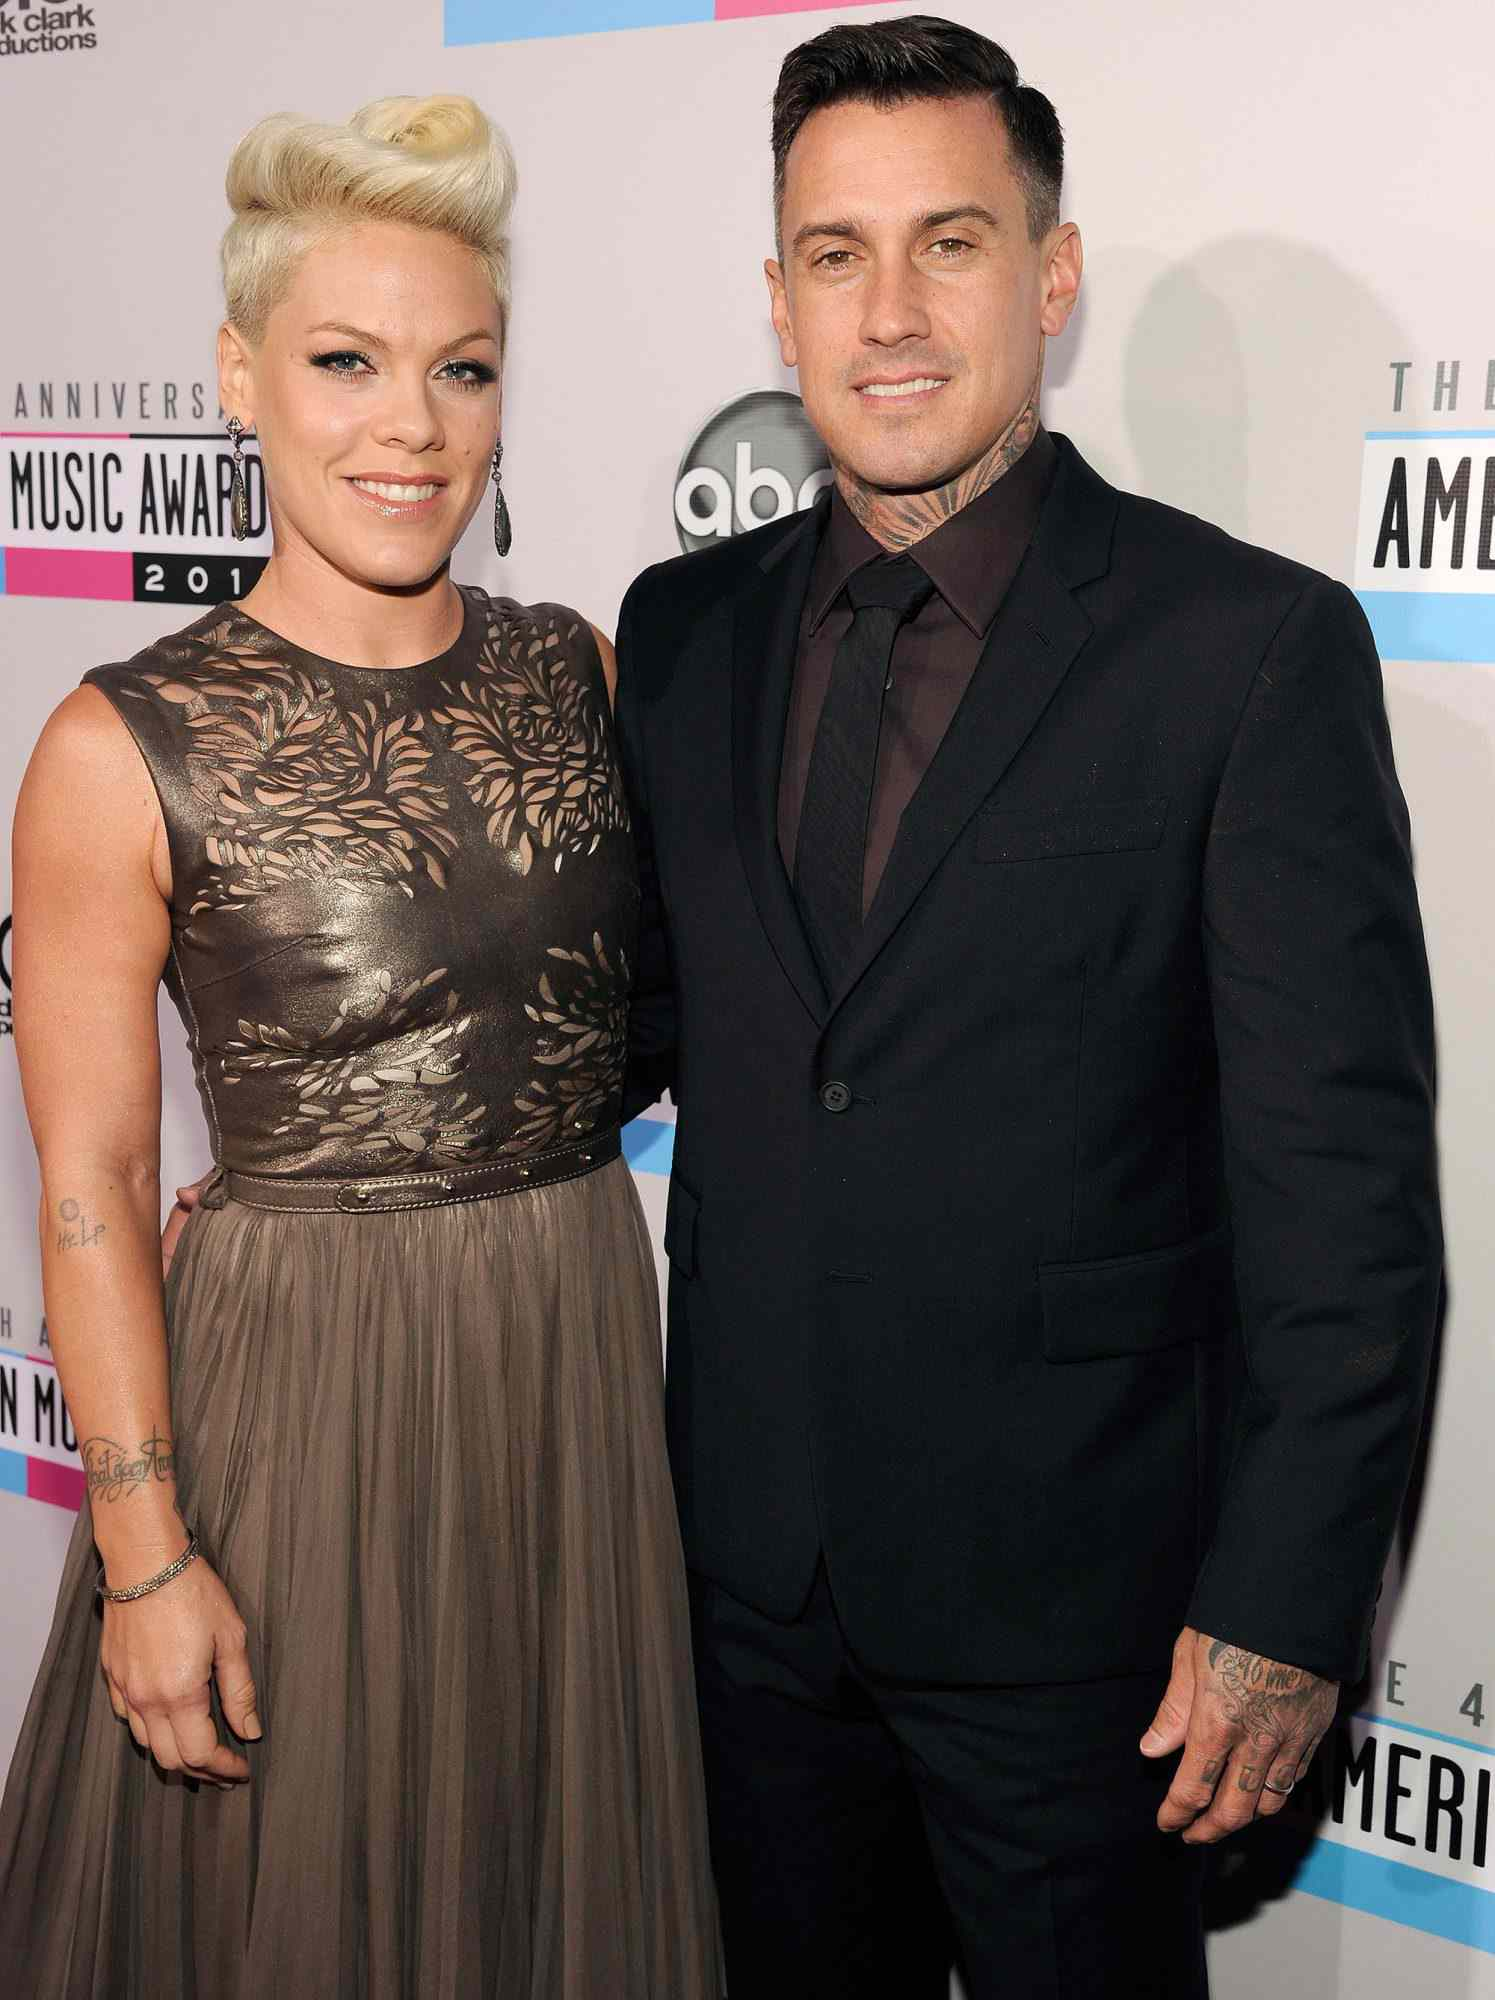 Pink and Carey Hart have gone through various ups and downs in their relationship.